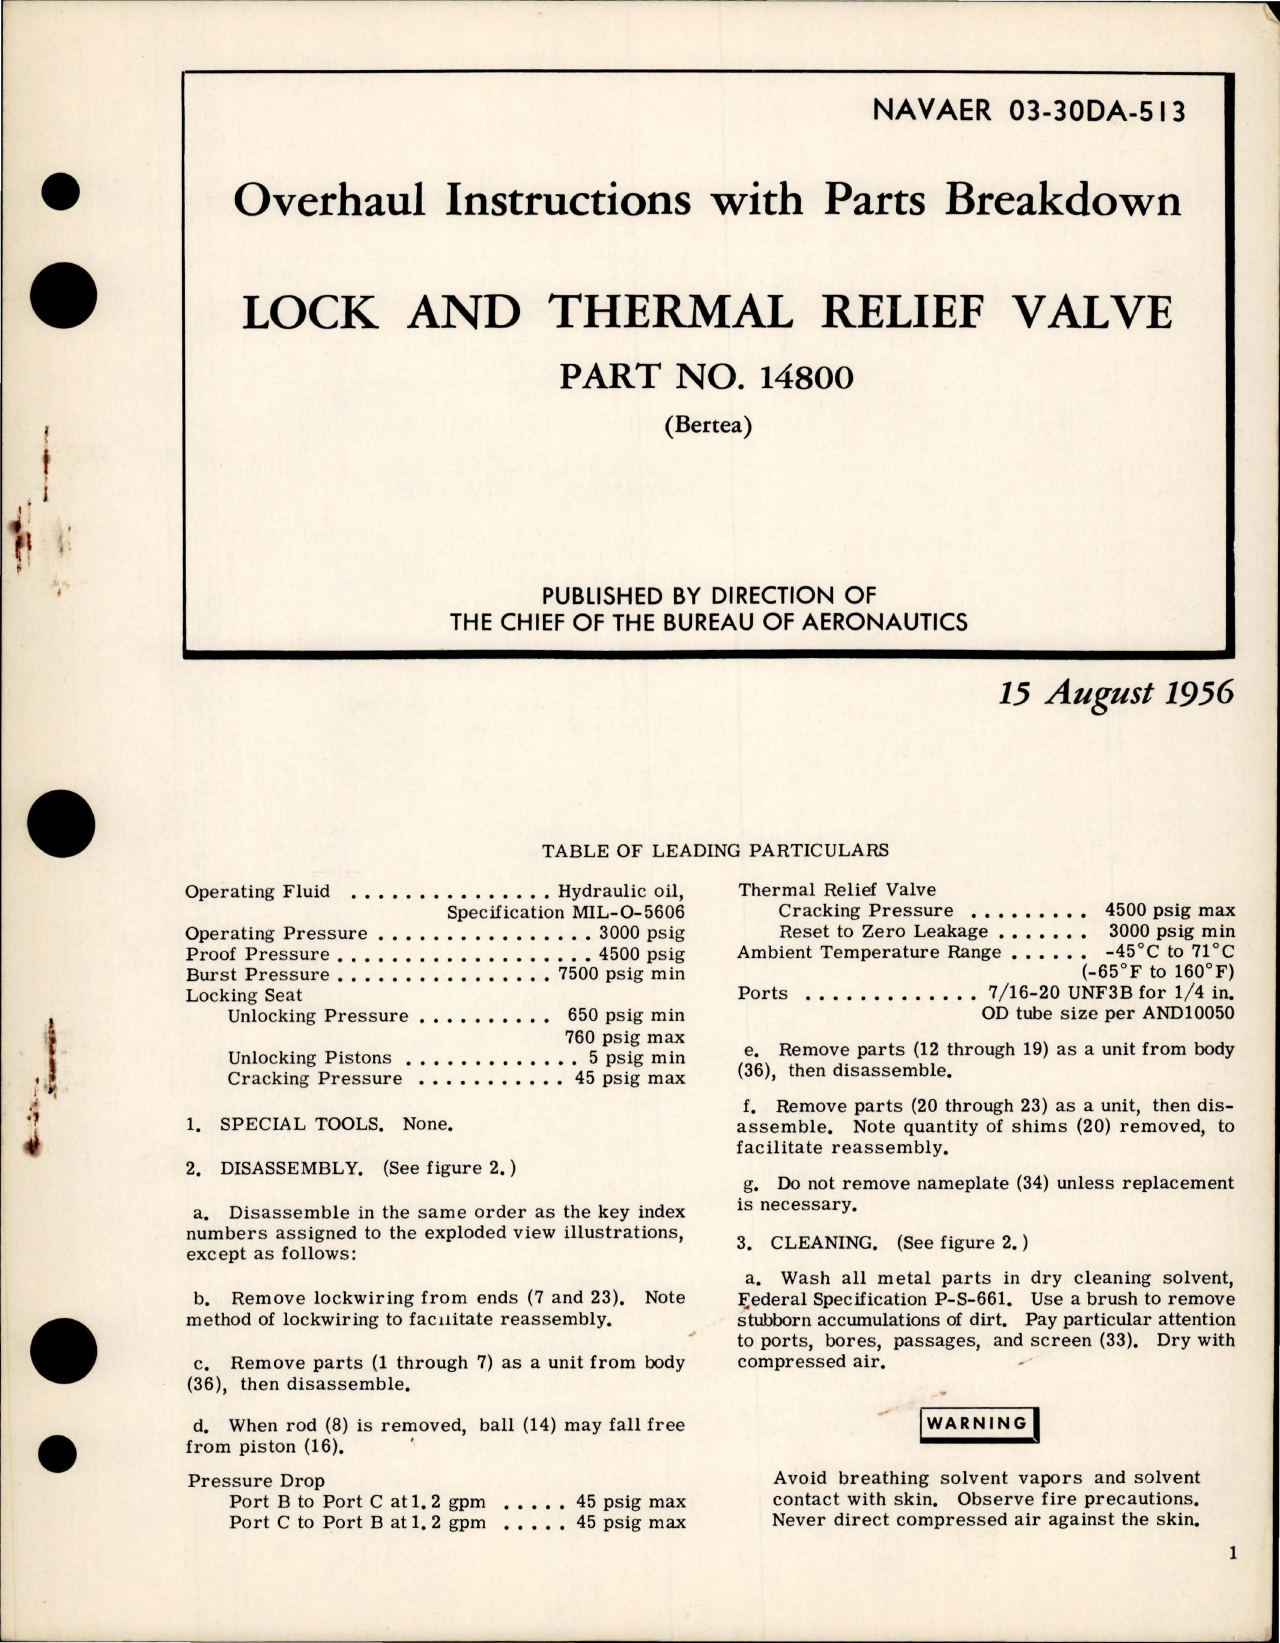 Sample page 1 from AirCorps Library document: Overhaul Instructions with Parts Breakdown for Lock and Thermal Relief Valve - Part 14800